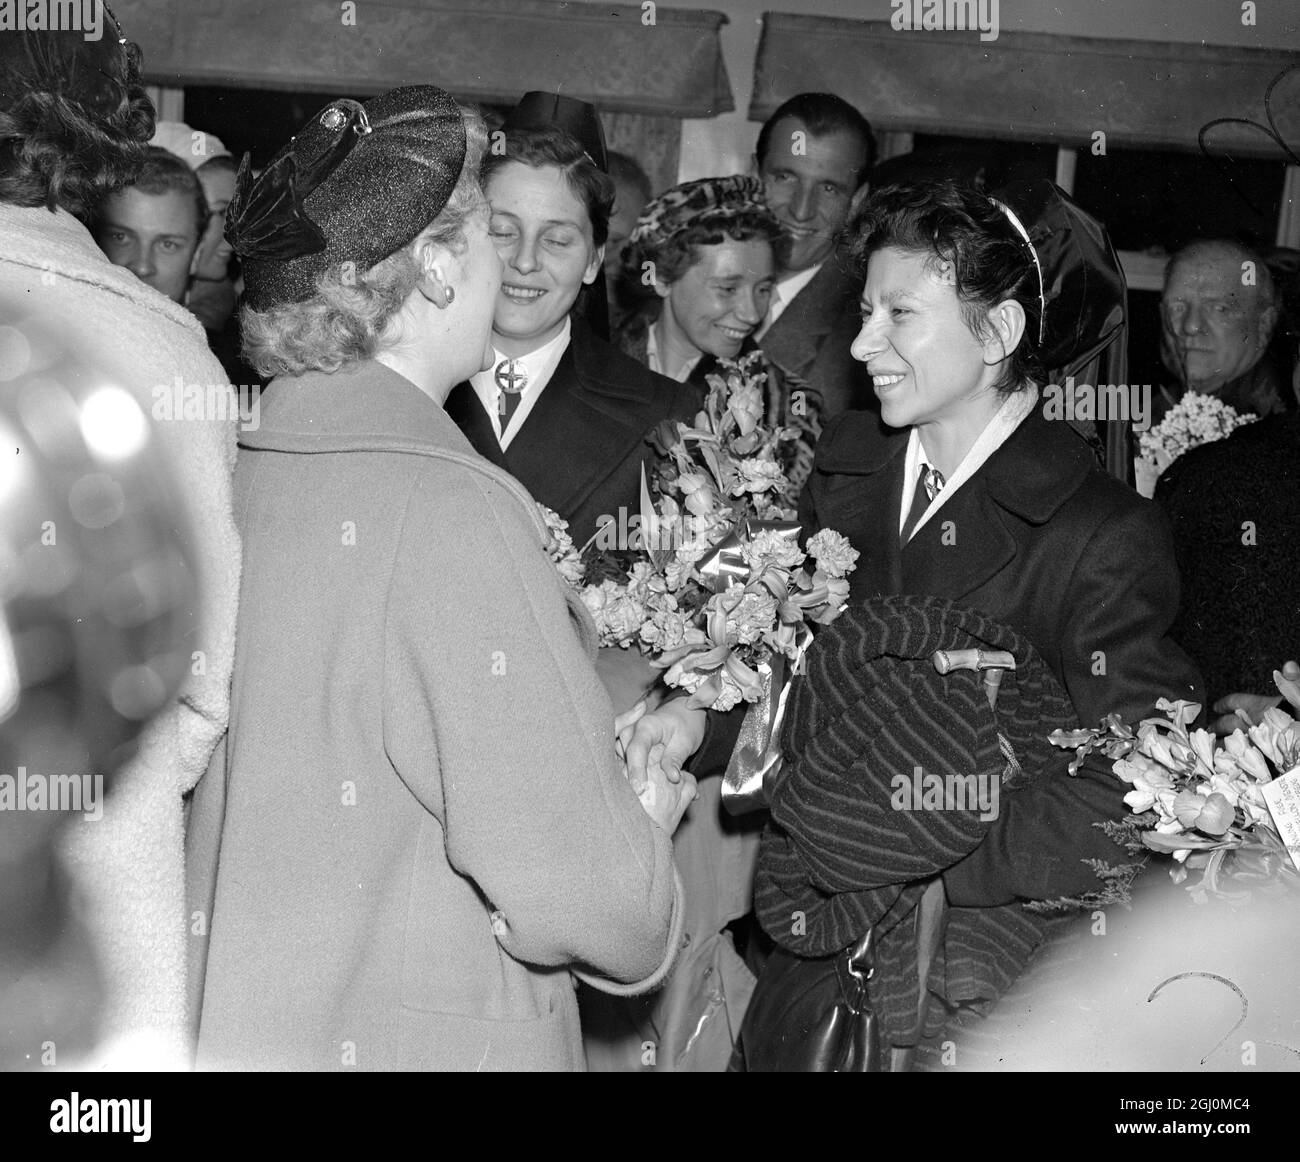 Group of doctor and nurses arrived in Manchester and give warm welcome in appreciation for Munich Hospital that helped the Manchester United Football team in the Munich air crash. 8th March 1958. Stock Photo